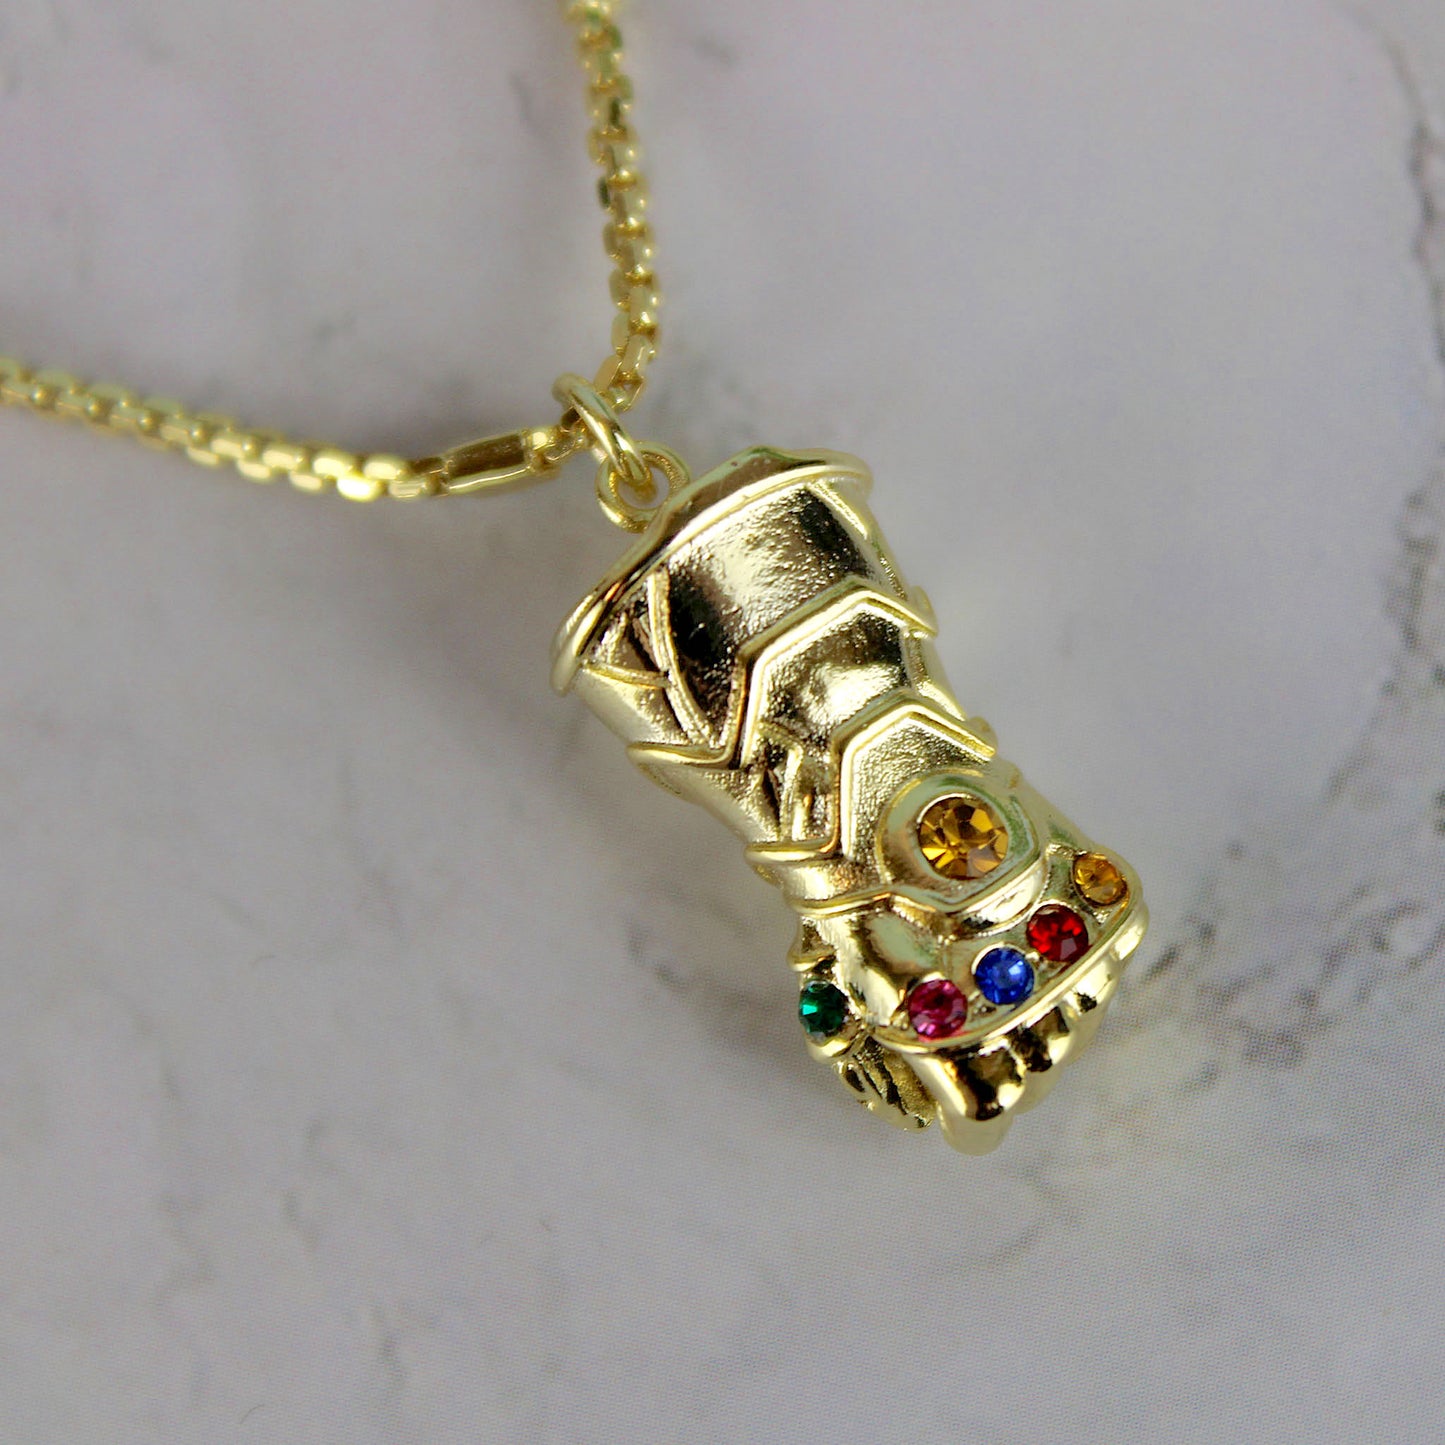 Thanos Infinity Gauntlet (Marvel) Gold Plated Crystal Necklace